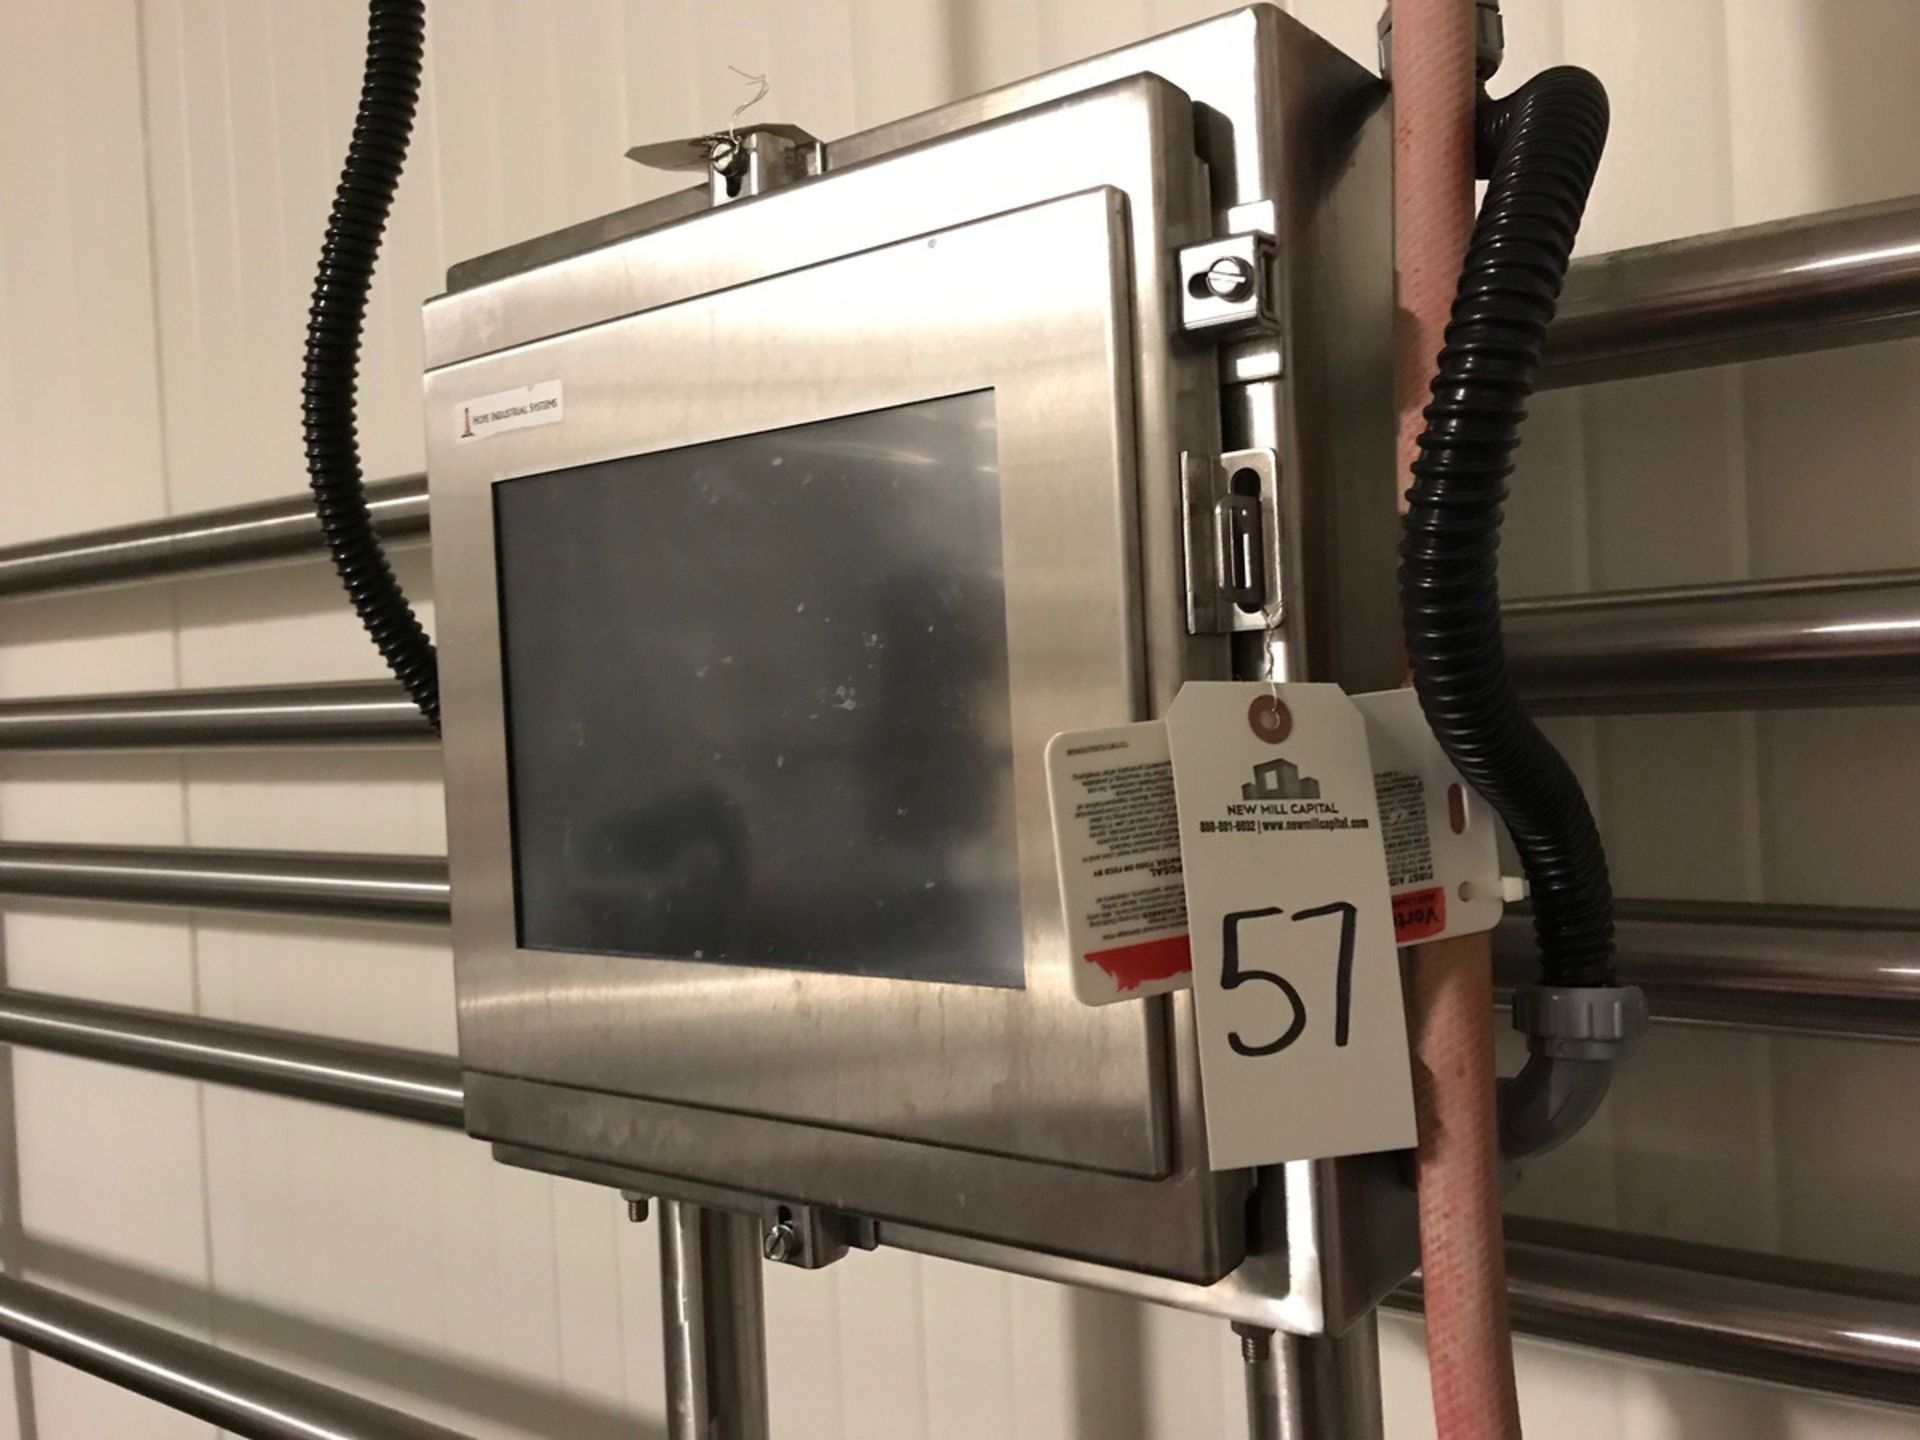 Stainless Steel Touch Screen Control (Electrical) Panel - The Gre | Subject to Bulk | Rig Fee: $100